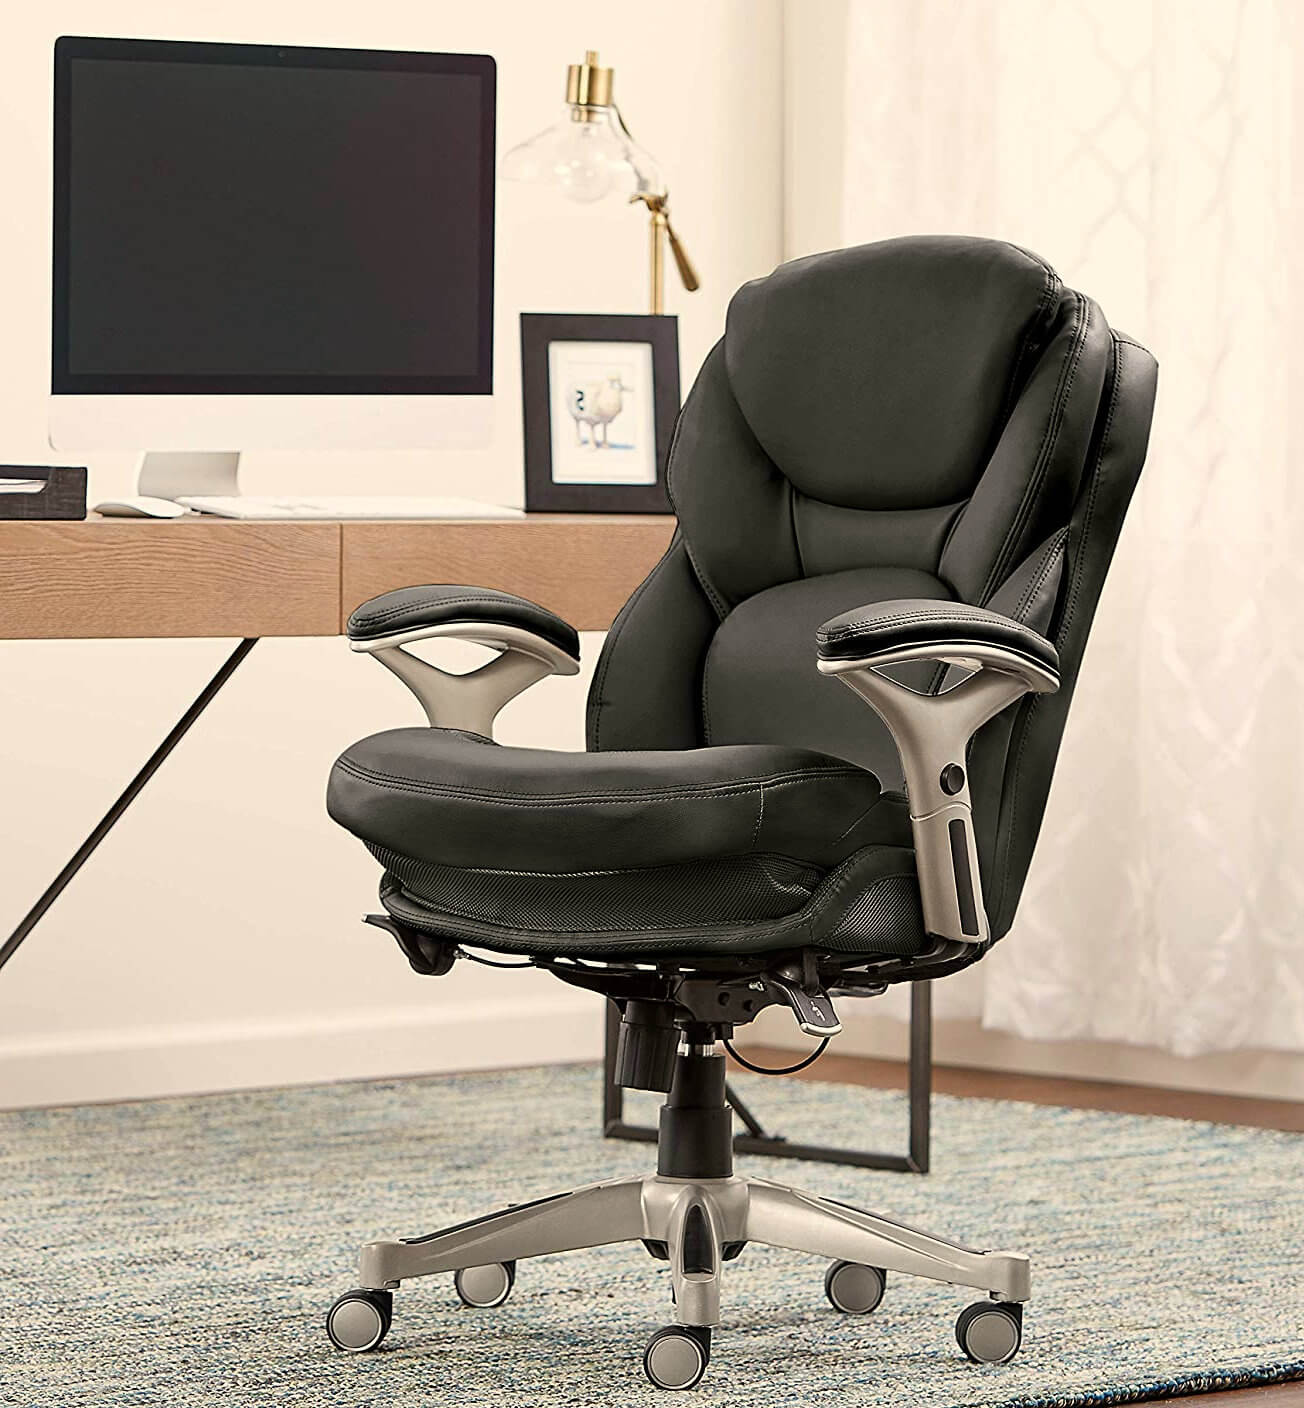 The Importance Of Ergonomic Office Chairs Engineers Network